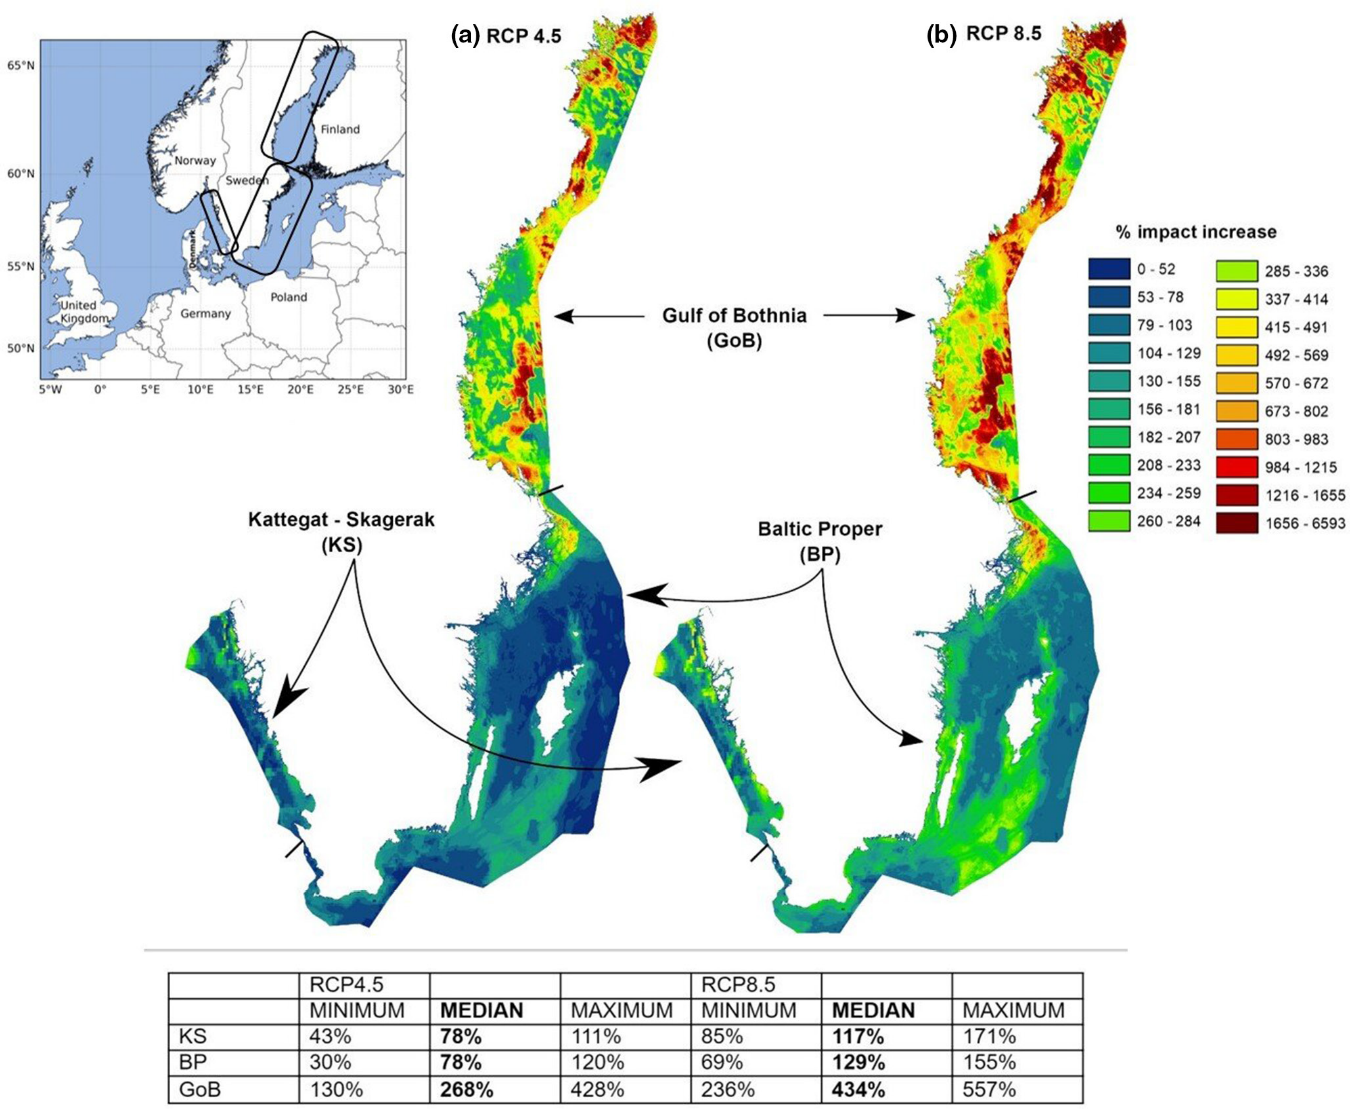 Two maps of accumulated human impacts for the Kattegat-Skagerrak-Baltic-Gulf of Bothnia are shown, one for RCP4.5 (moderate), one for RCP8.5 (extreme). Also a table is included, summarizing the projected impacts in % for each scenario. 